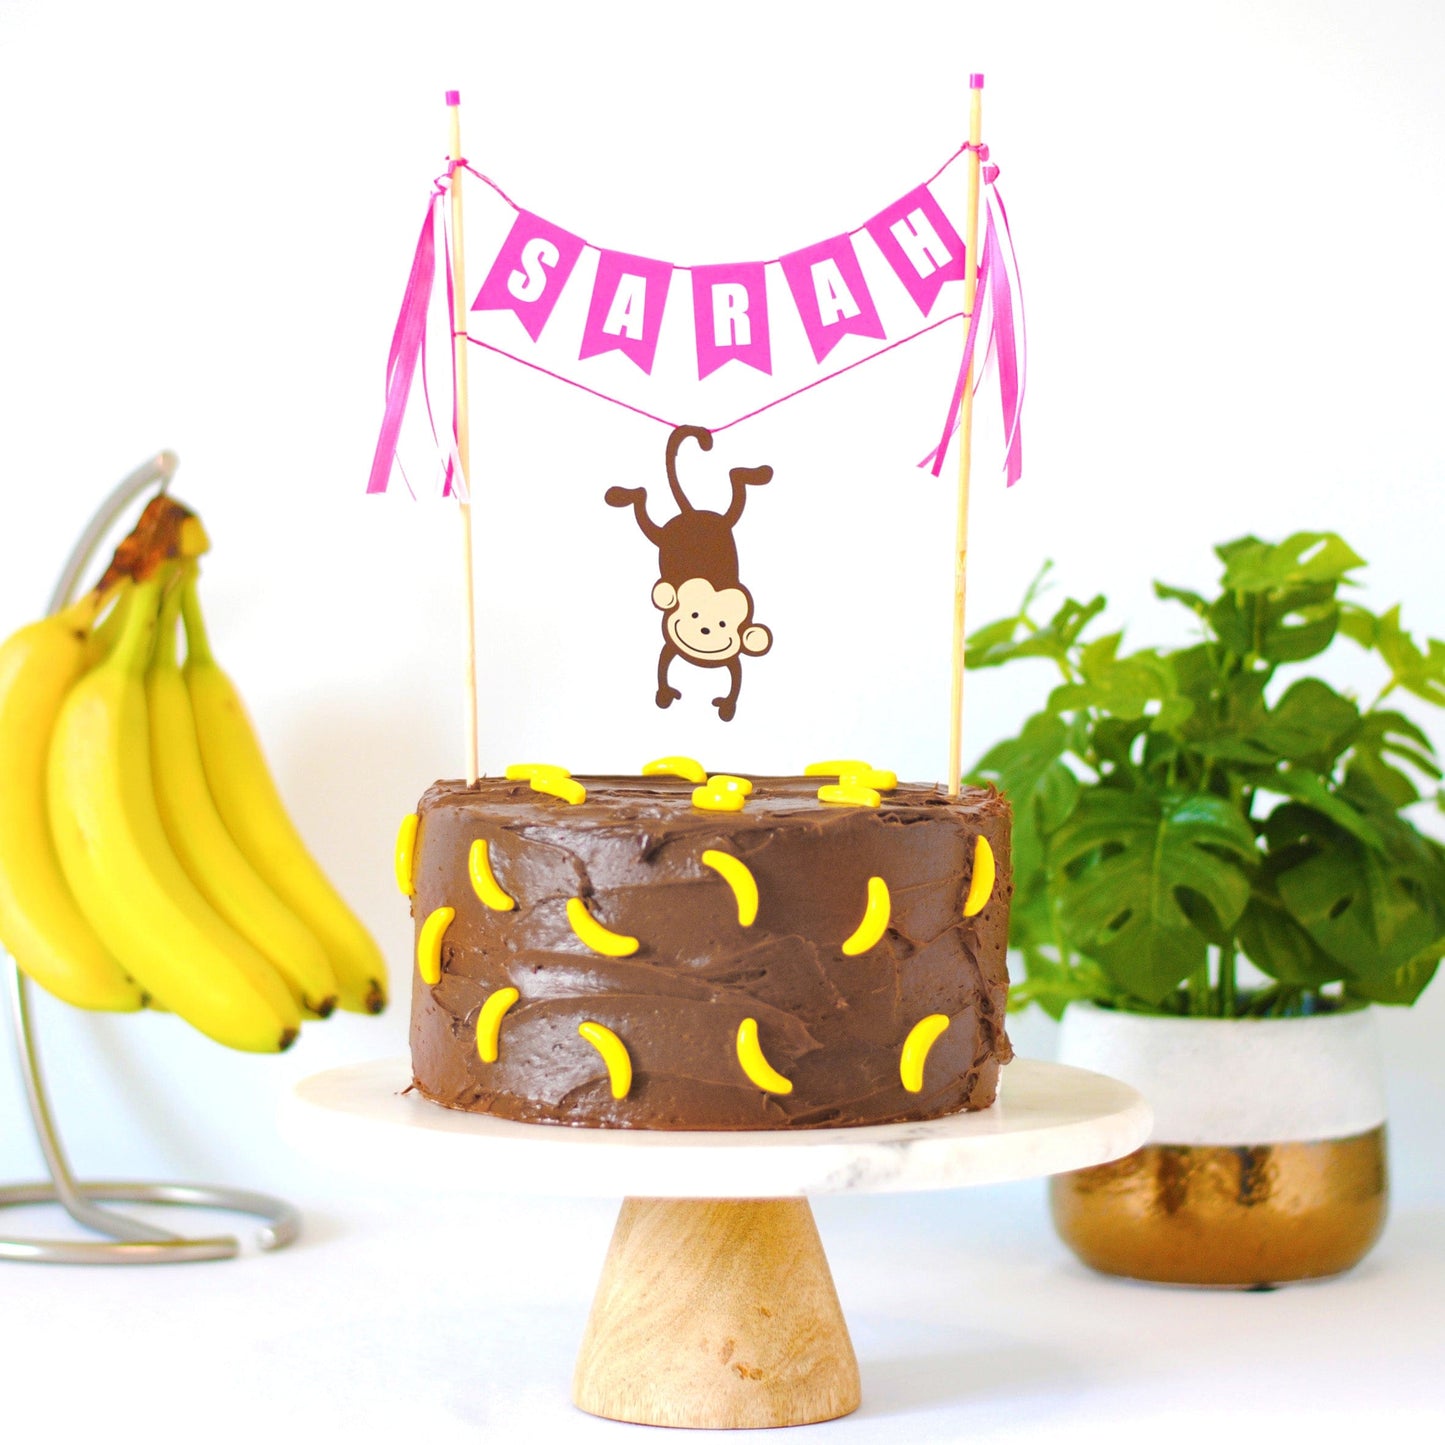 girls monkey birthday cake topper with name banner and monkey hanging from its tail shown on chocolate frosted cake with banana candies